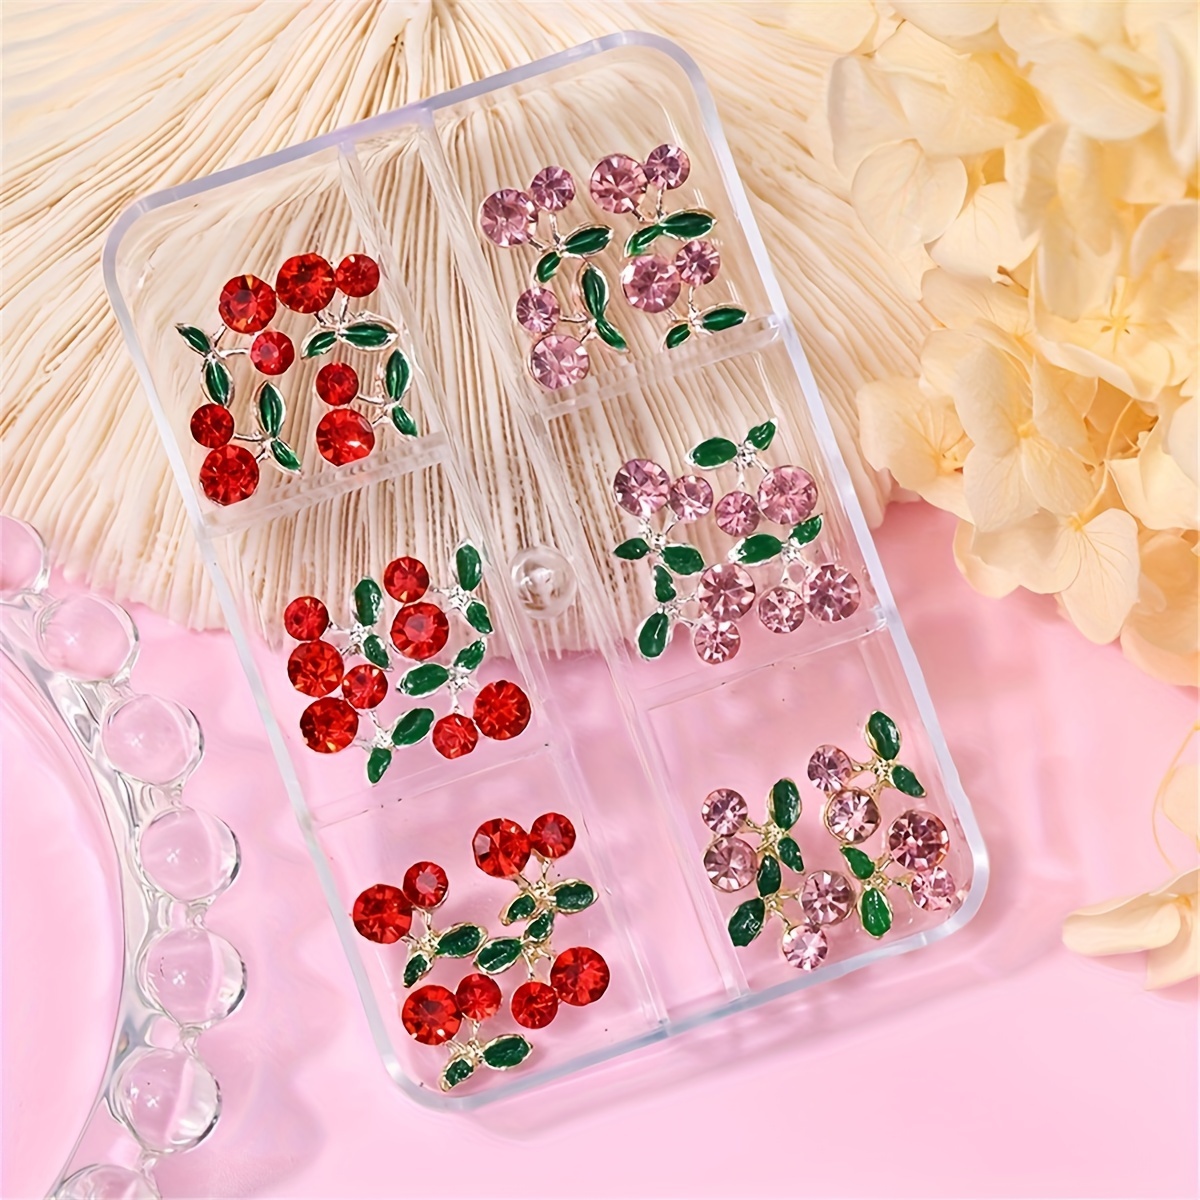 

24pcs Sparkling 3d Cherry Nail Charms With Rhinestones - Alloy Diy Nail Art Decorations, Odorless Nail Charms And Accessories Nail Art Charms